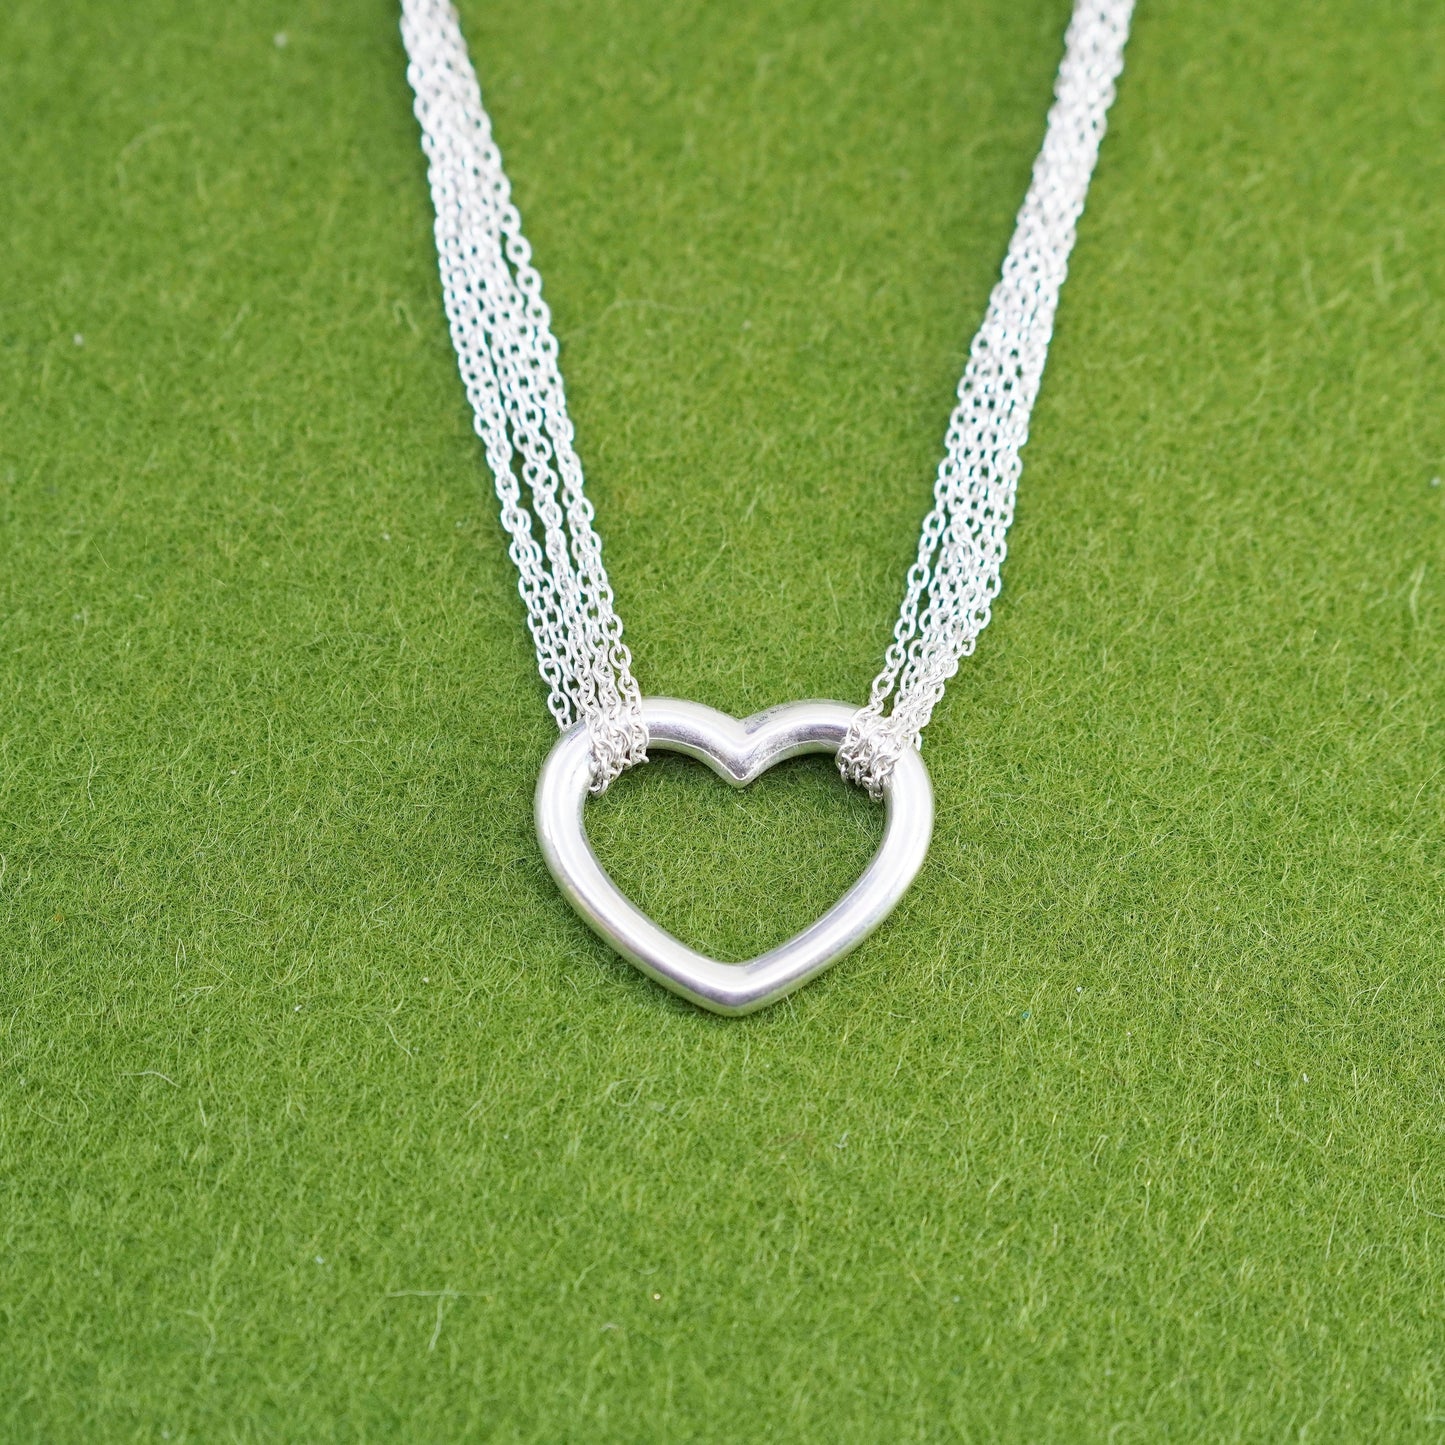 14+3”, Sterling silver necklace, Italy 925 strands circle chain heart pendant